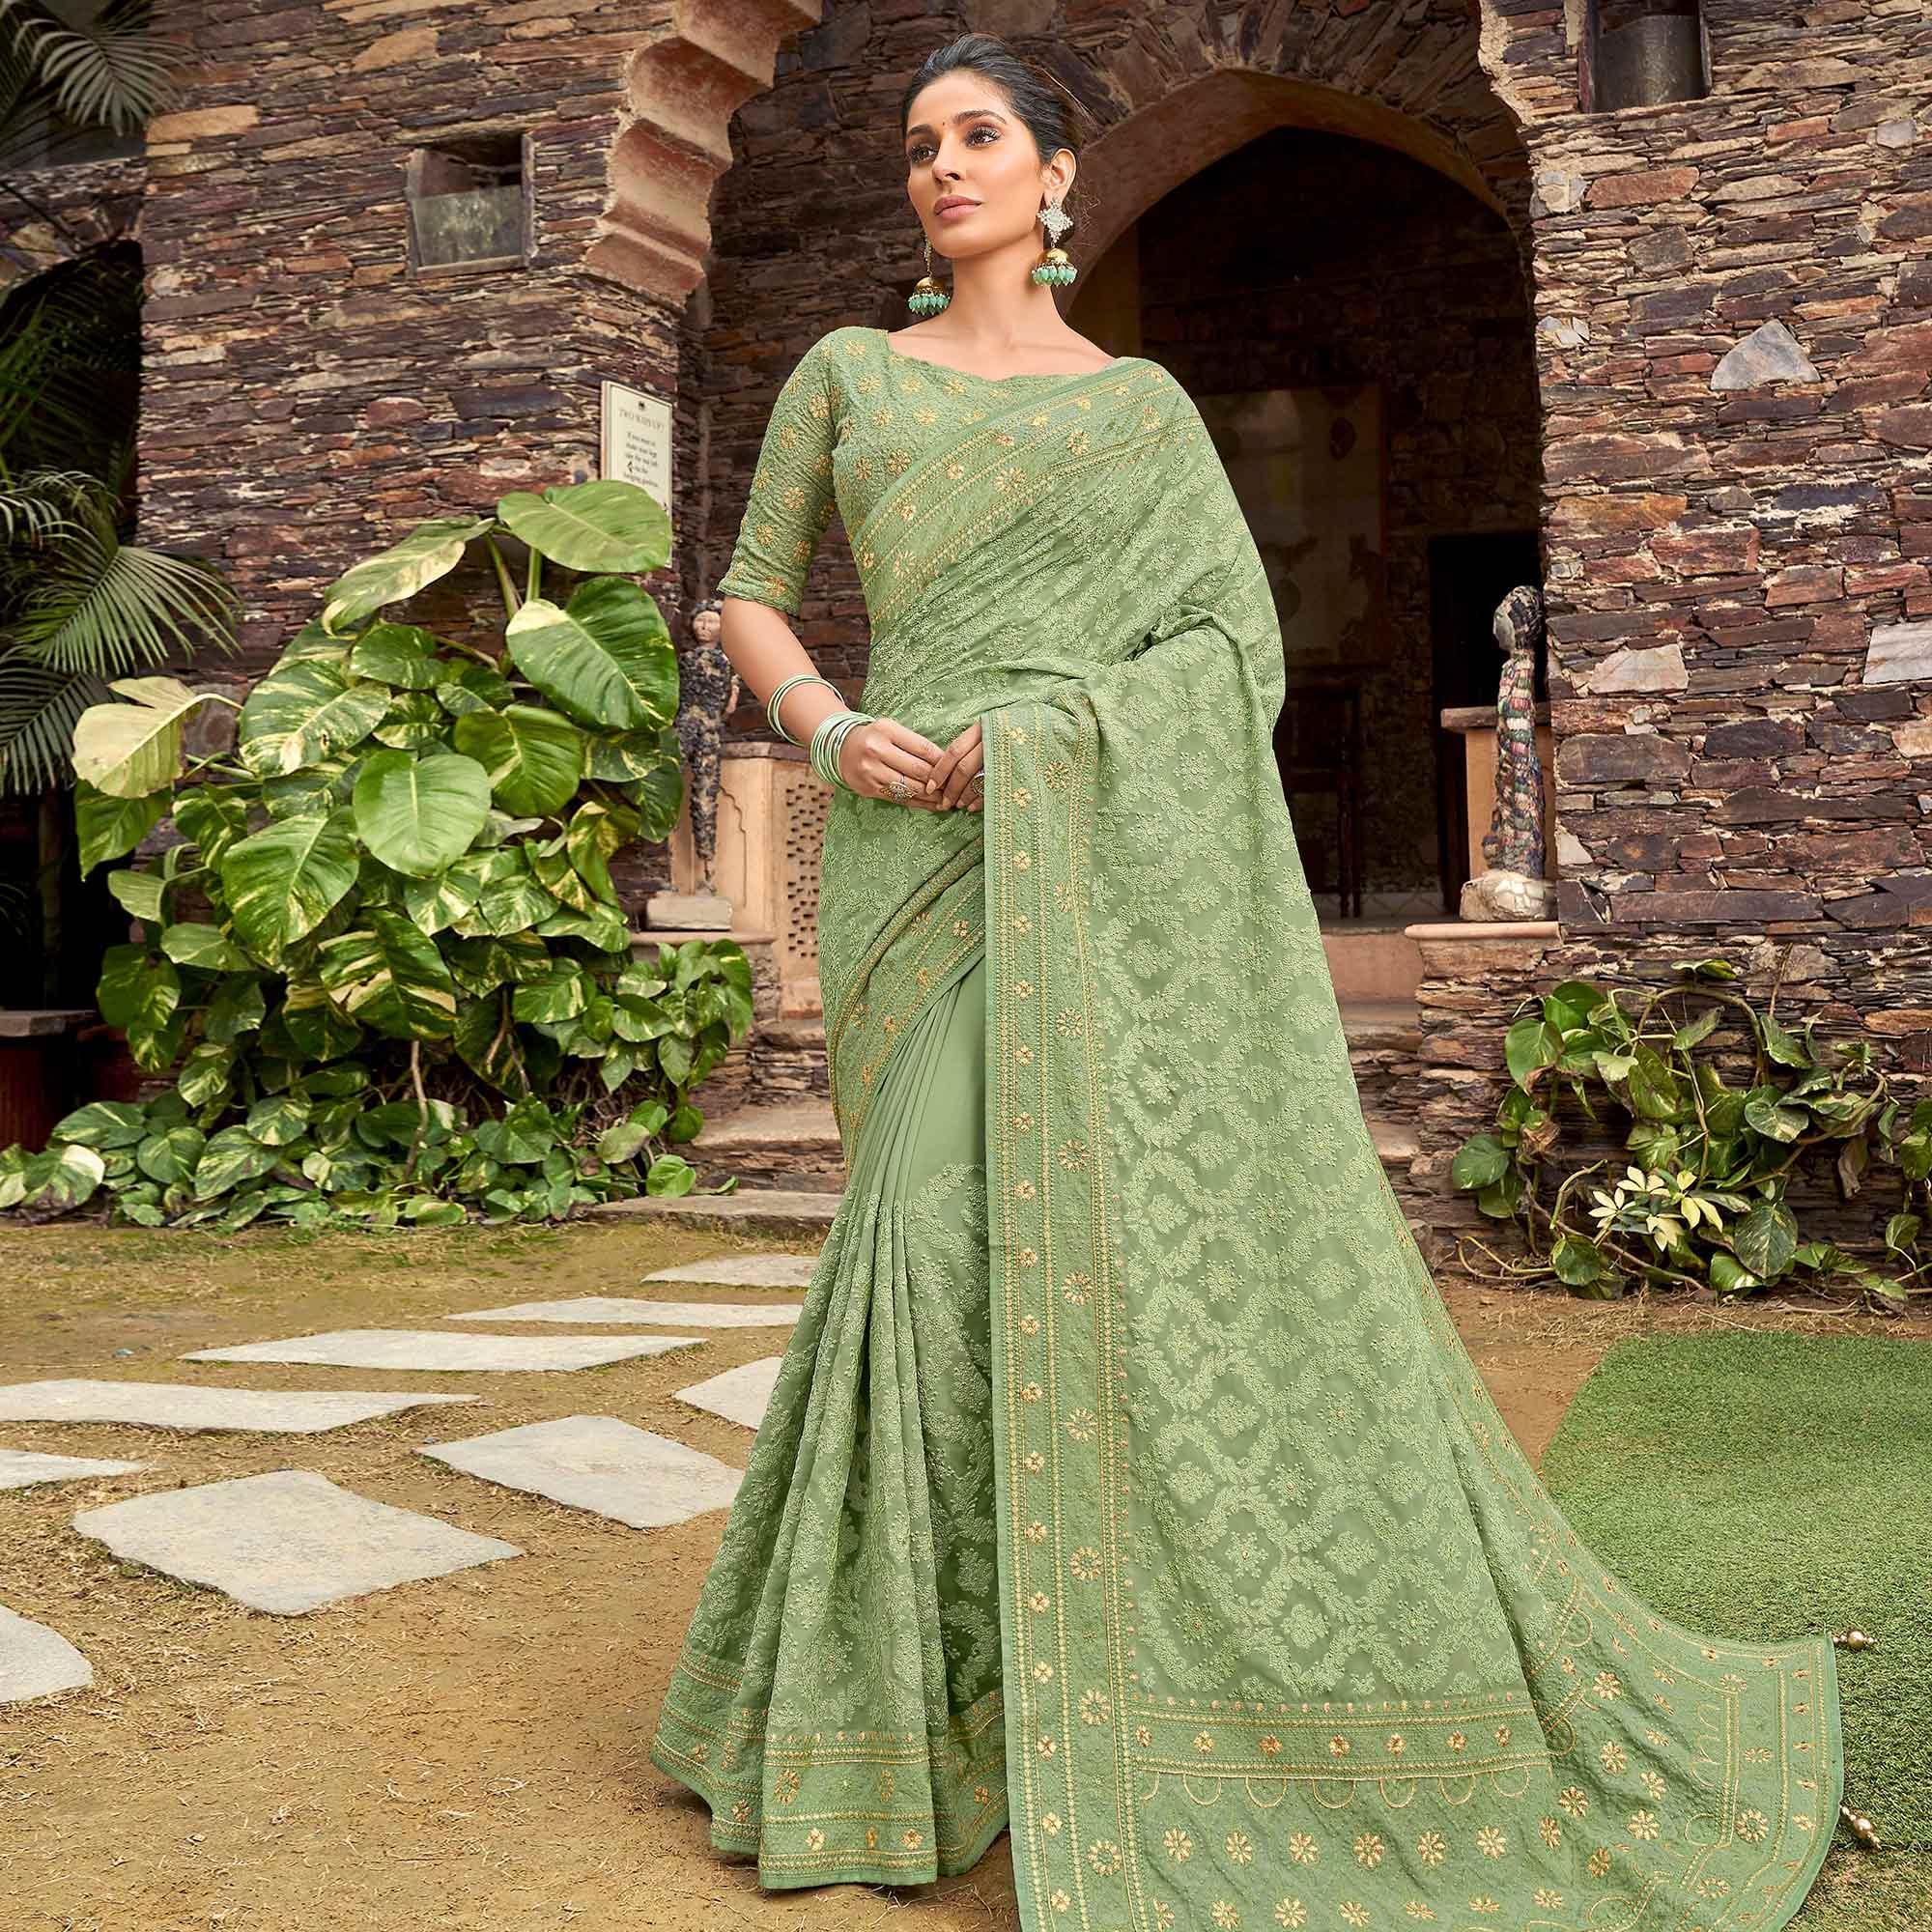 Eye-catching Pista Green Colored Partywear Embroidered Satin - Gerogette Saree - Peachmode